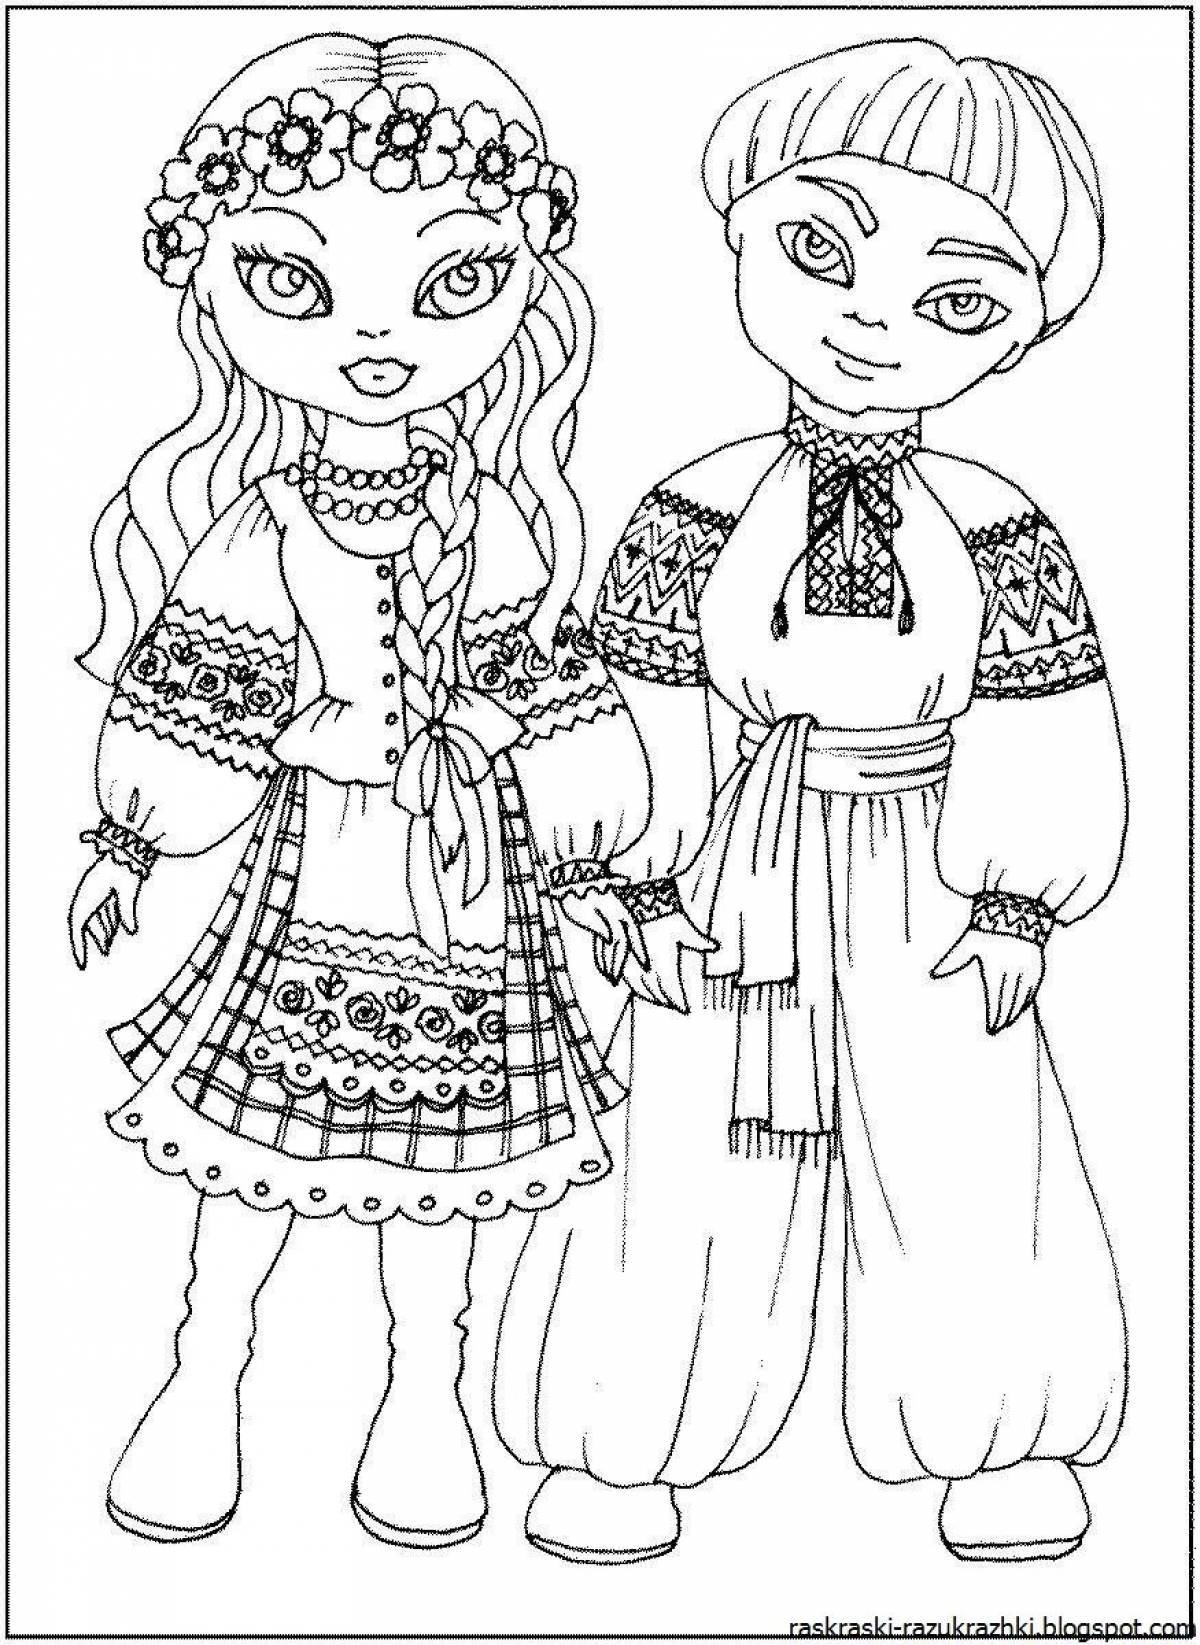 Creative coloring of folk costumes for children